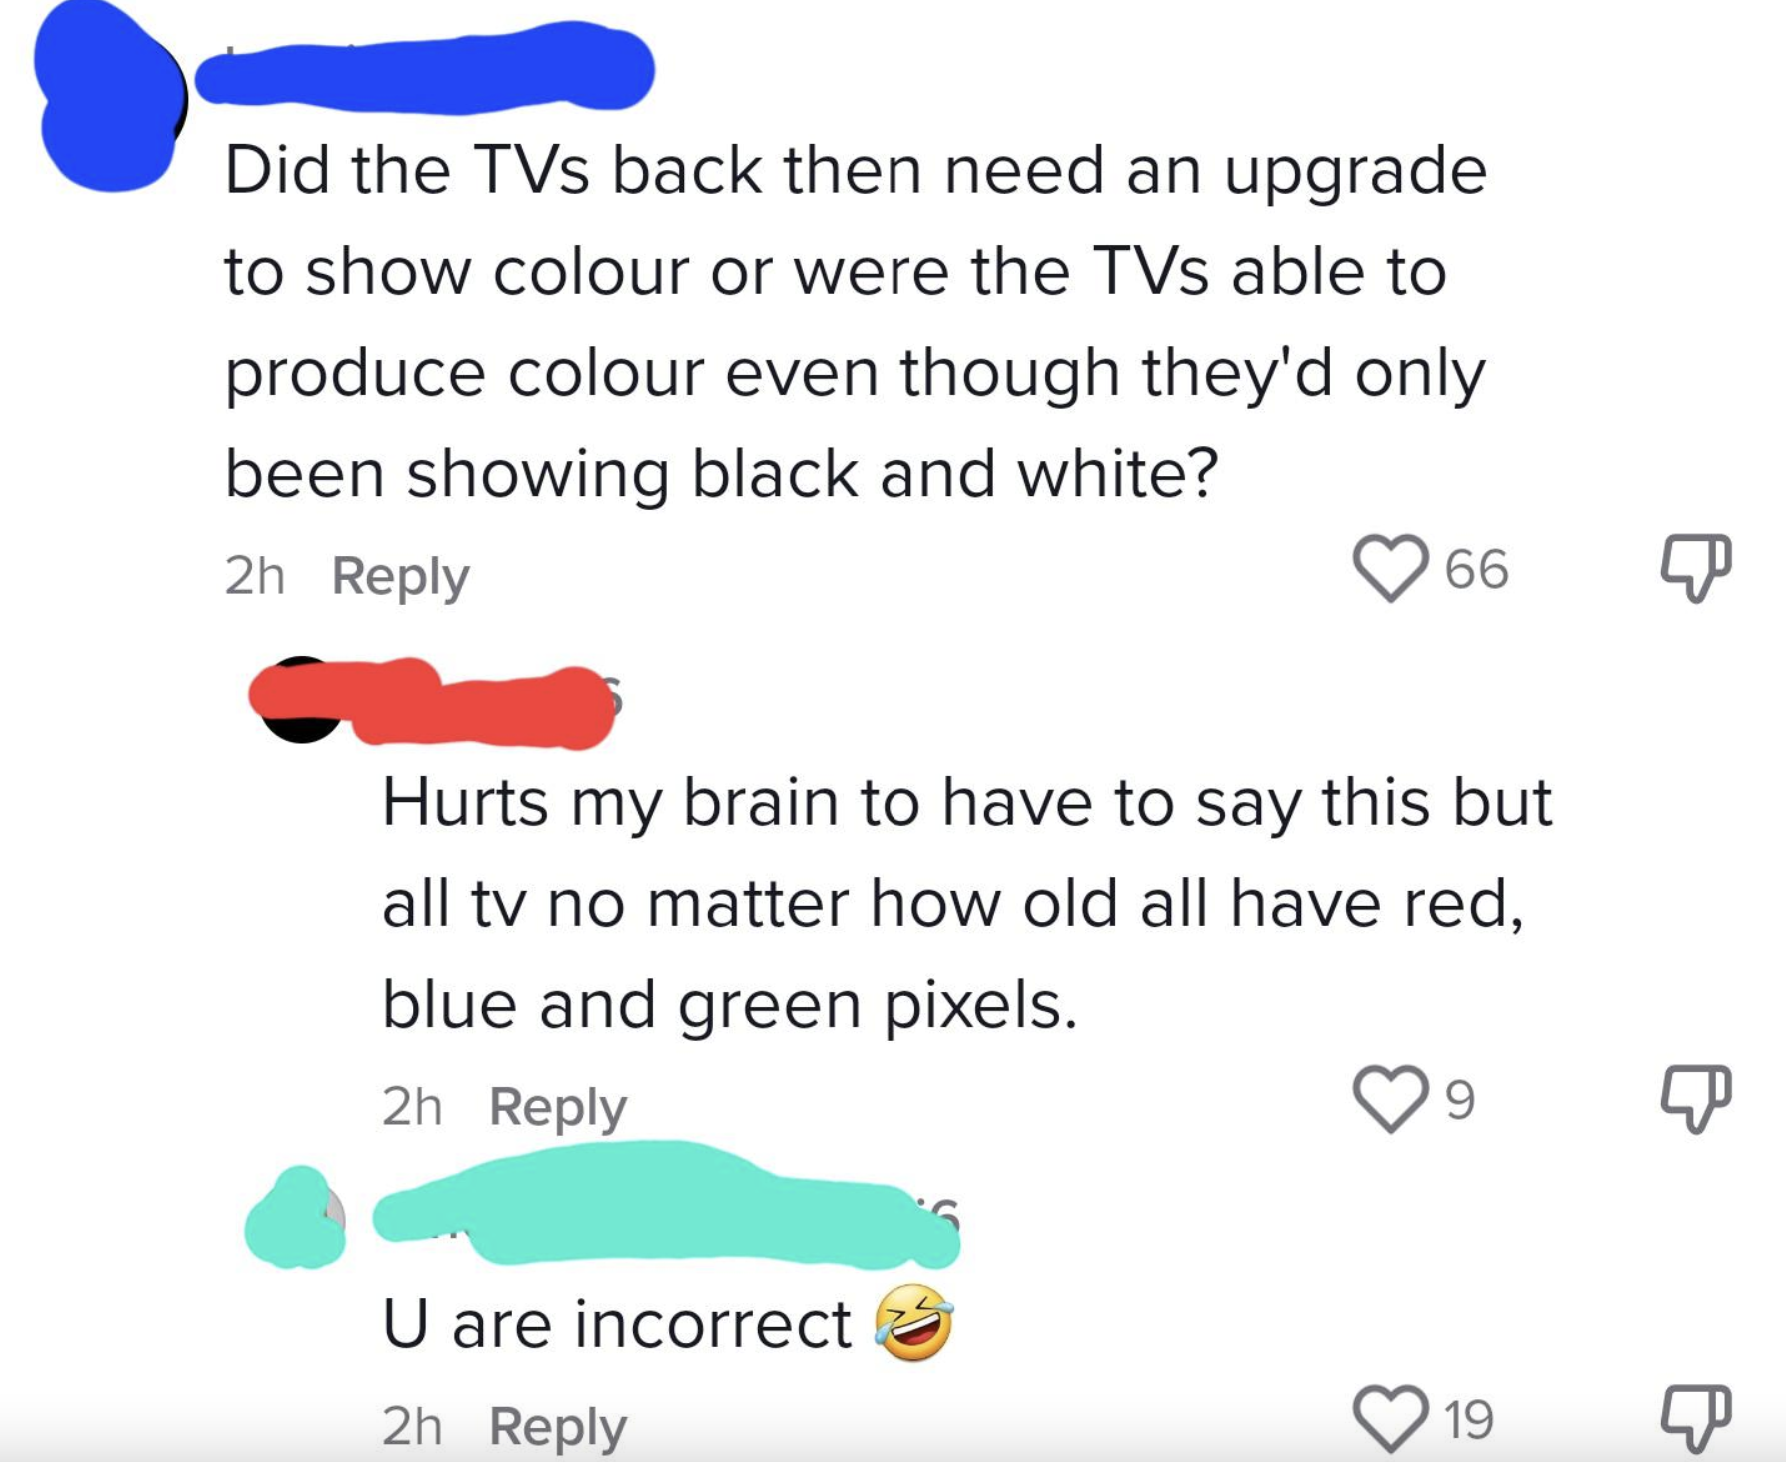 Confidently Incorrect - diagram - Did the TVs back then need an upgrade to show colour or were the TVs able to produce colour even though they'd only been showing black and white?